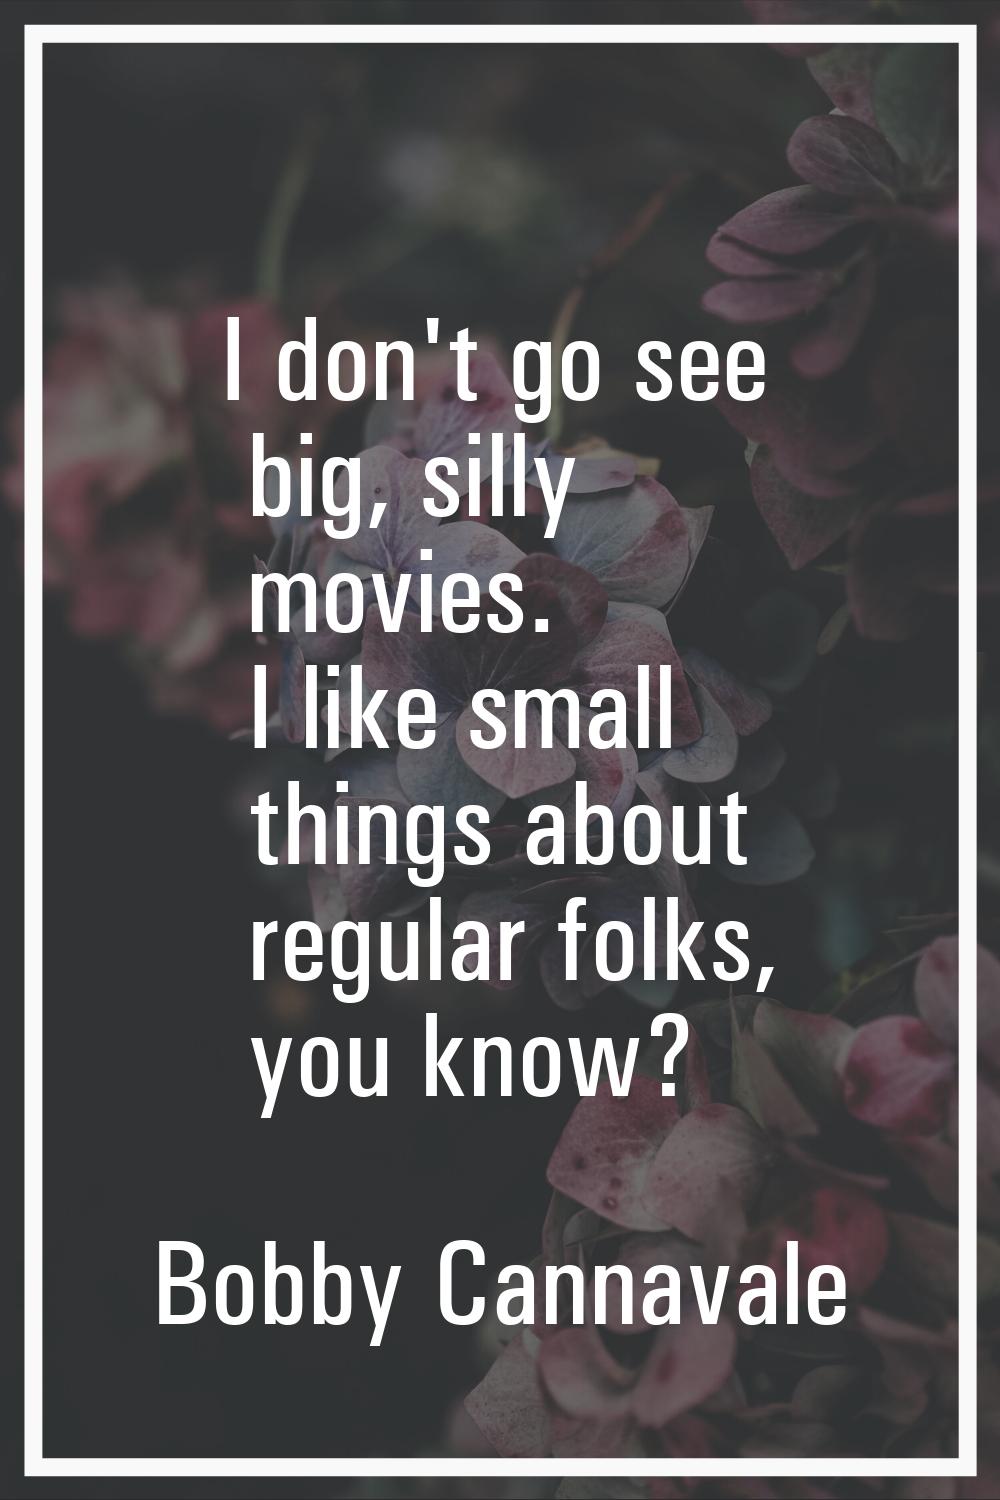 I don't go see big, silly movies. I like small things about regular folks, you know?